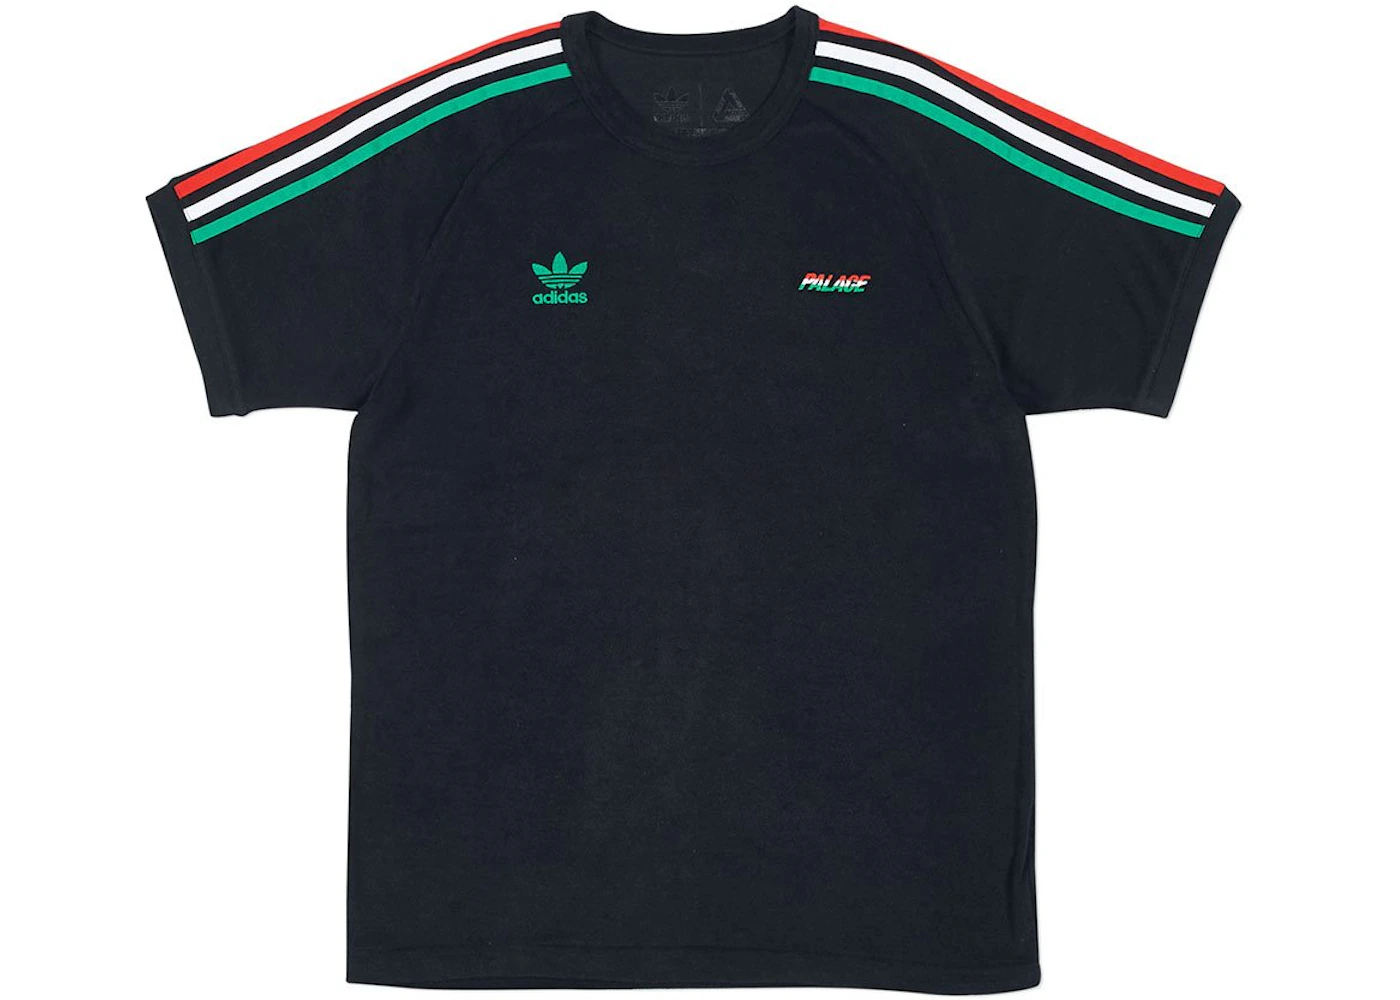 Popa Inclinarse Oral Palace adidas Terry T-Shirt Black - SS18 Men's - US